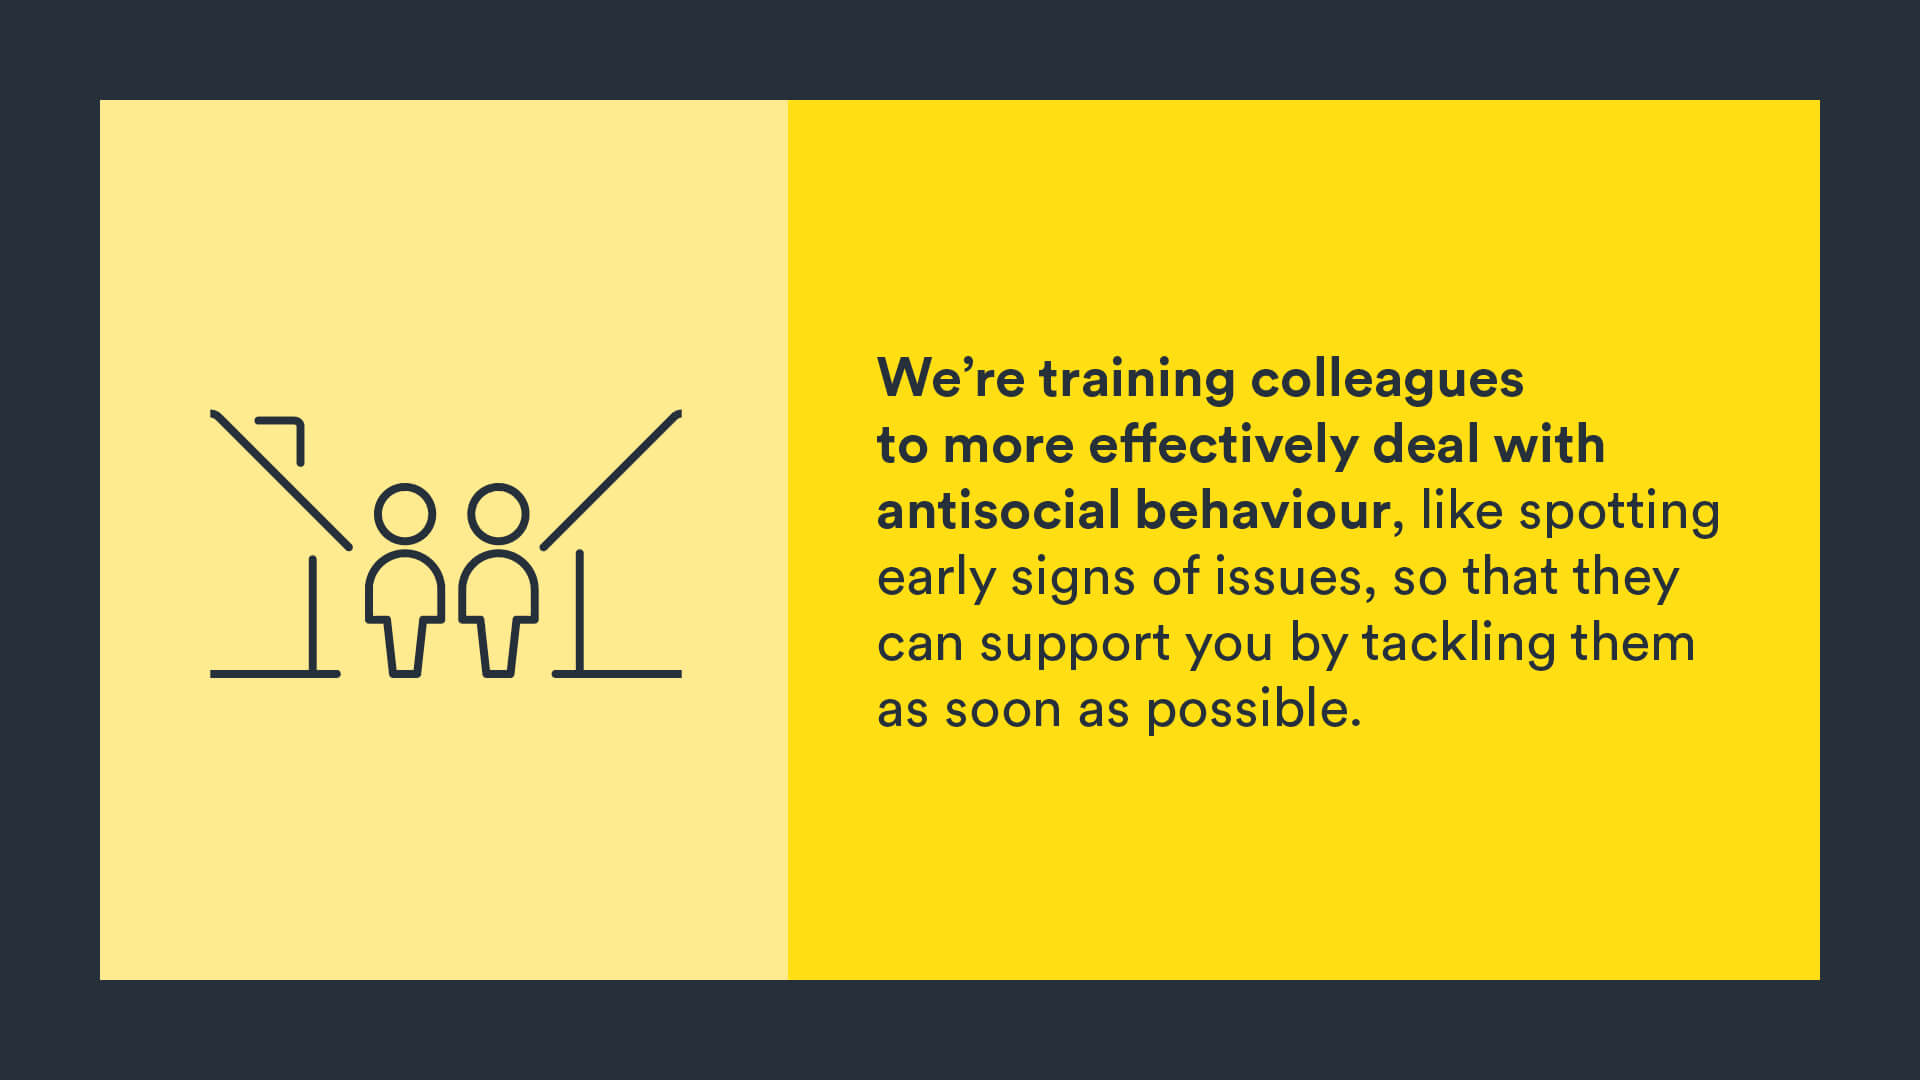 Infographic: we’re training colleagues to deal with antisocial behaviour more effectively, like spotting early signs of issues, so that they can support you by tackling them as soon as possible.